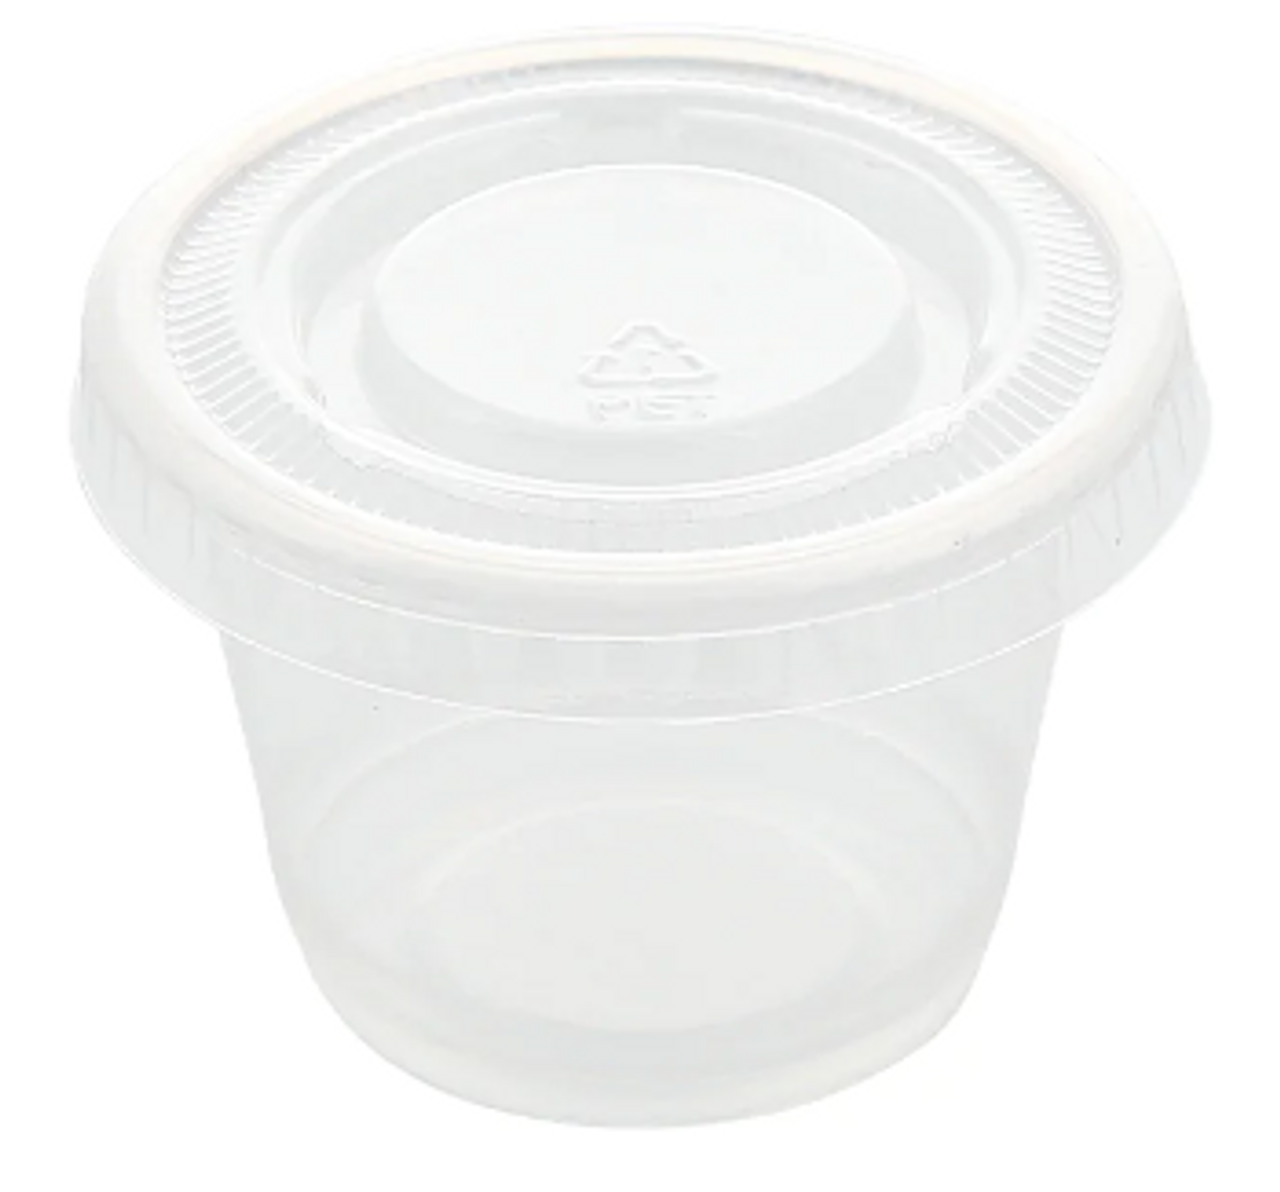 16 oz. BPA Free Food Grade Freezer Grade Round Container with Lid  (T31416FCP & T31416FCLCP)- starting quantity 30 count - FREE SHIPPING -  ePackageSupply